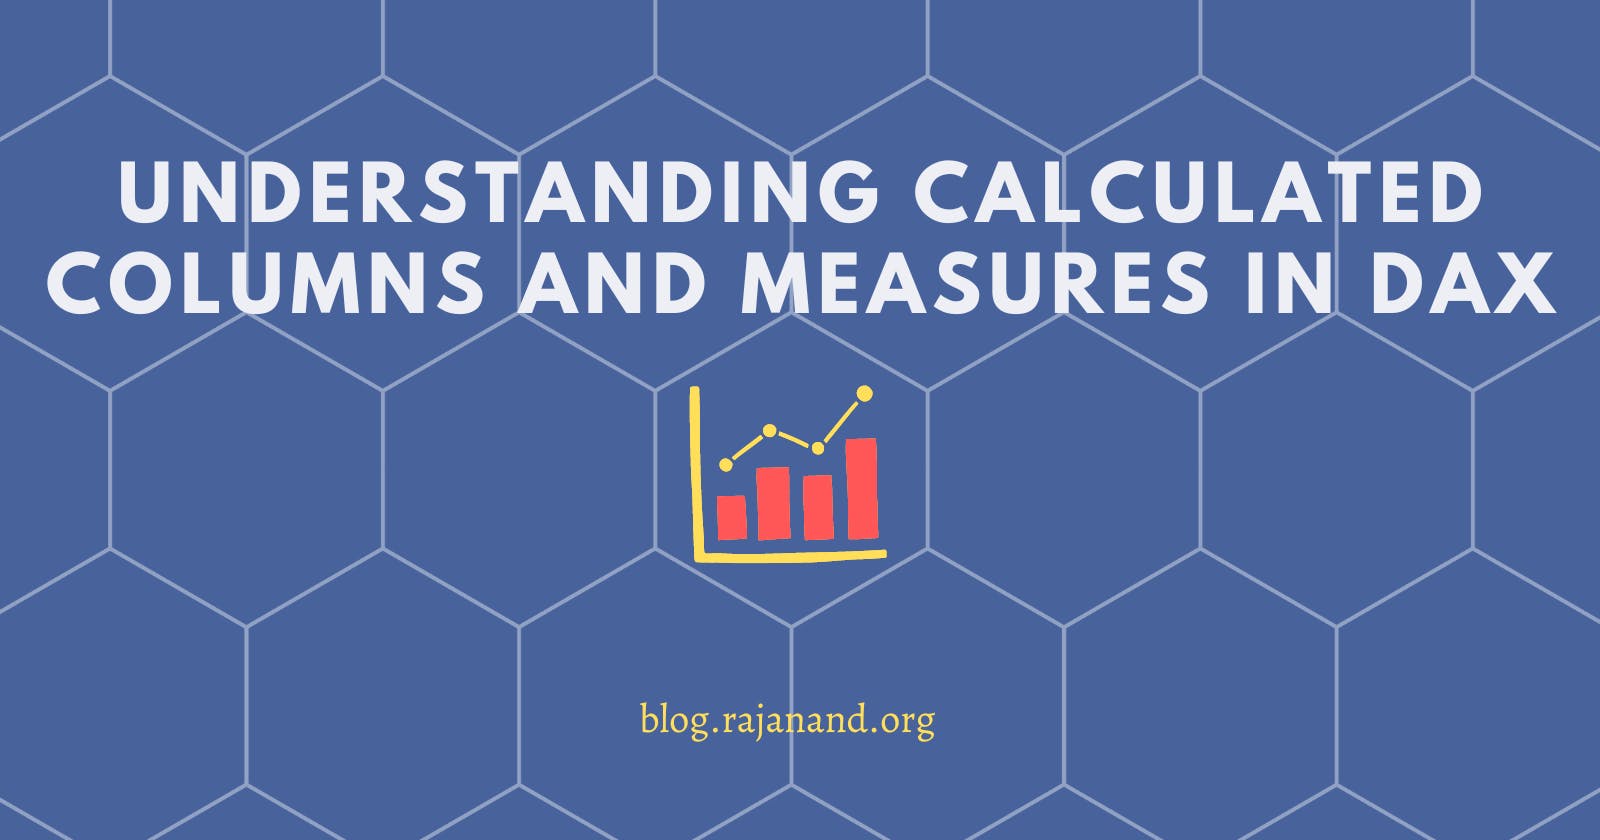 Understanding Calculated Columns and Measures in DAX